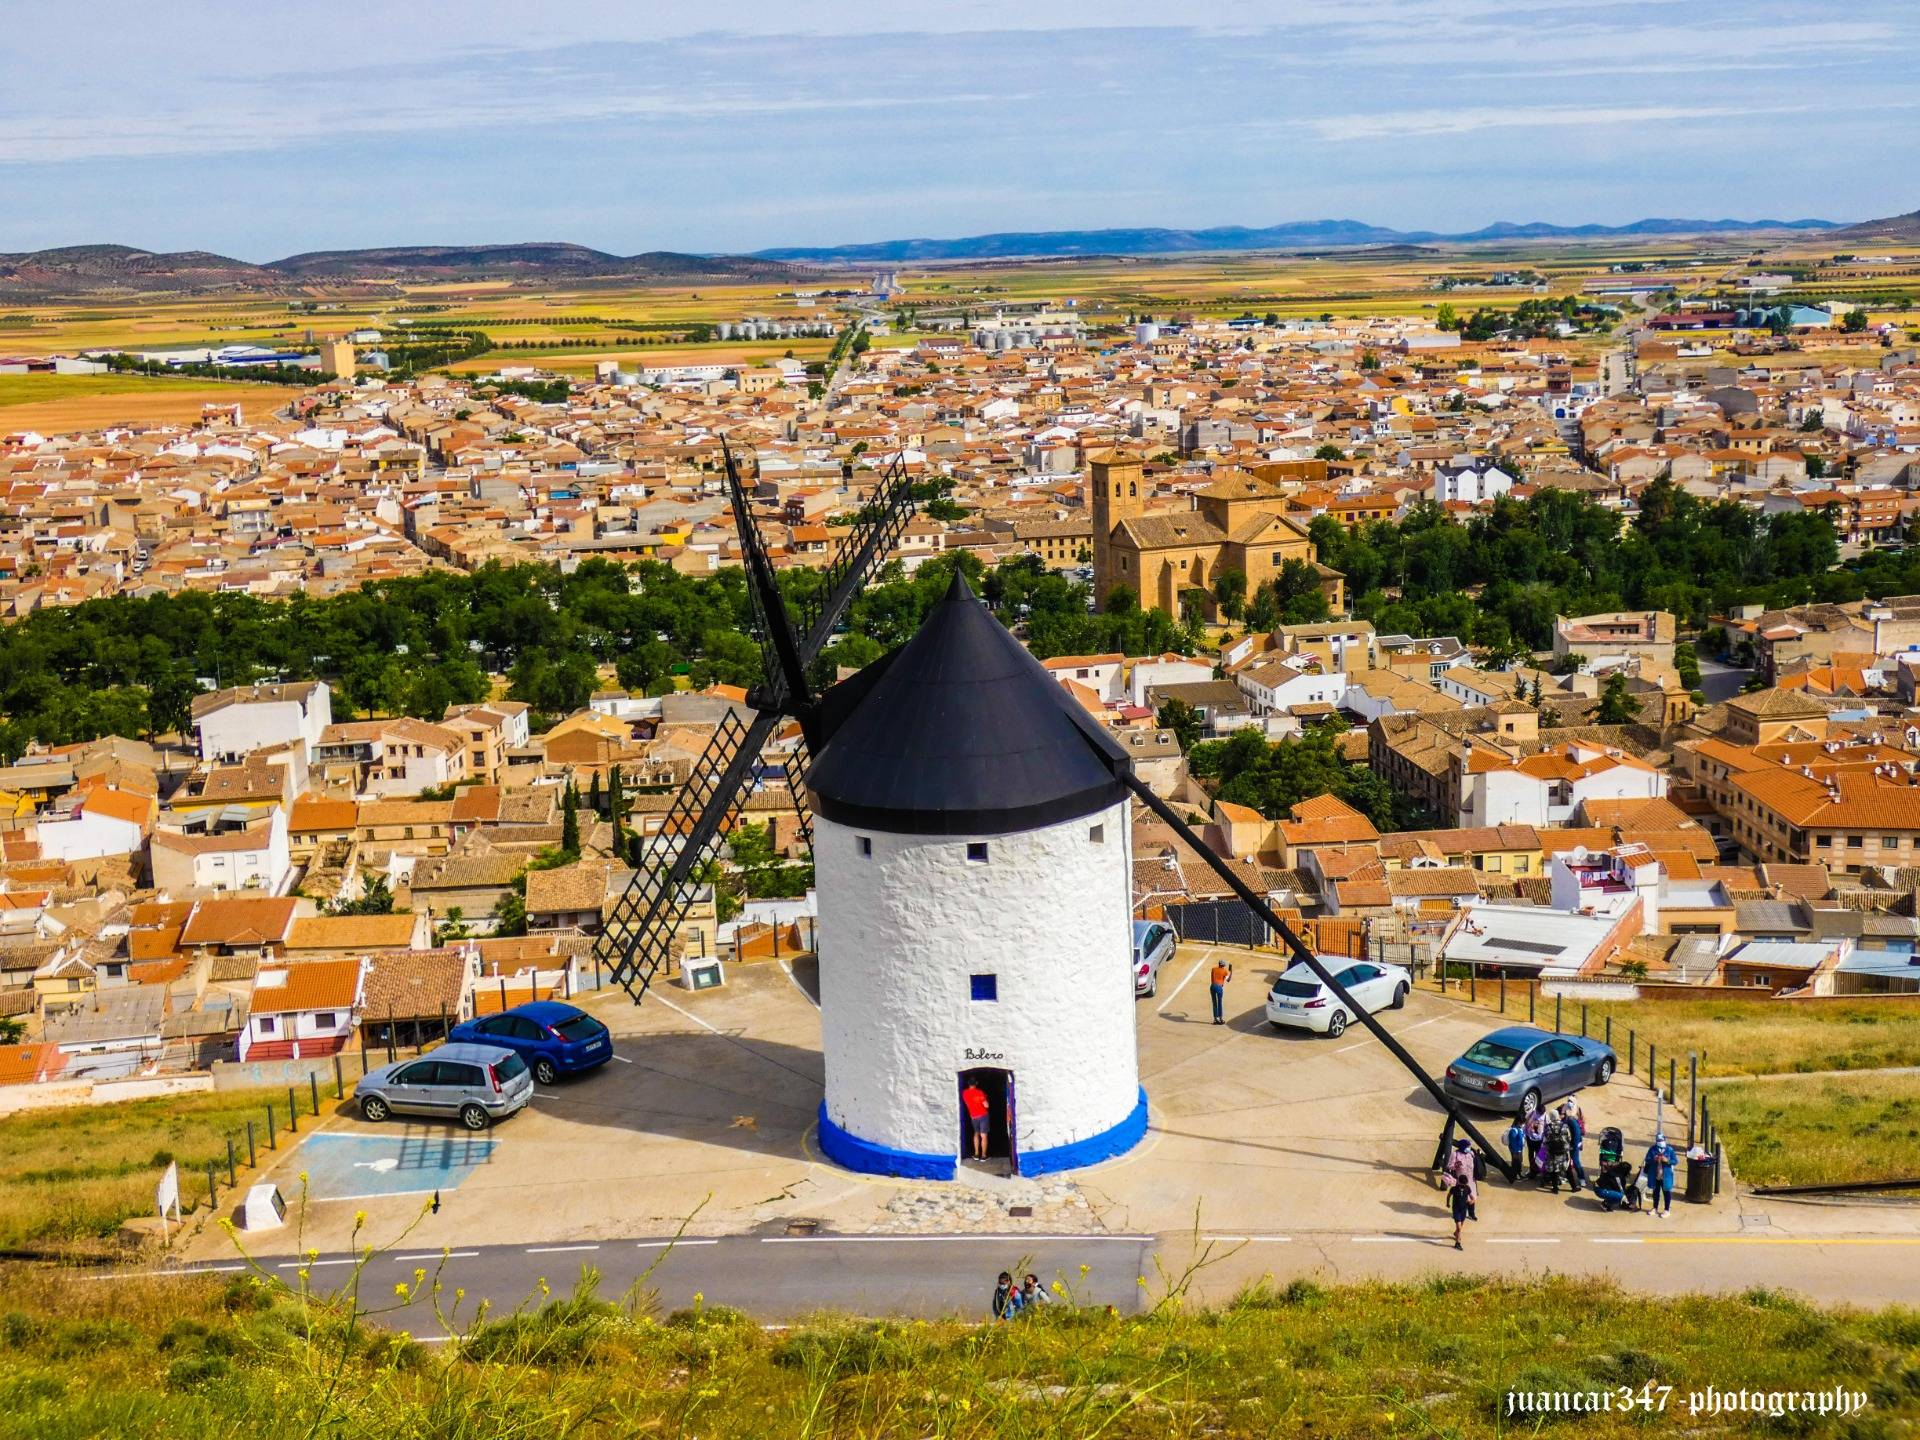 A place in La Mancha called Consuegra
